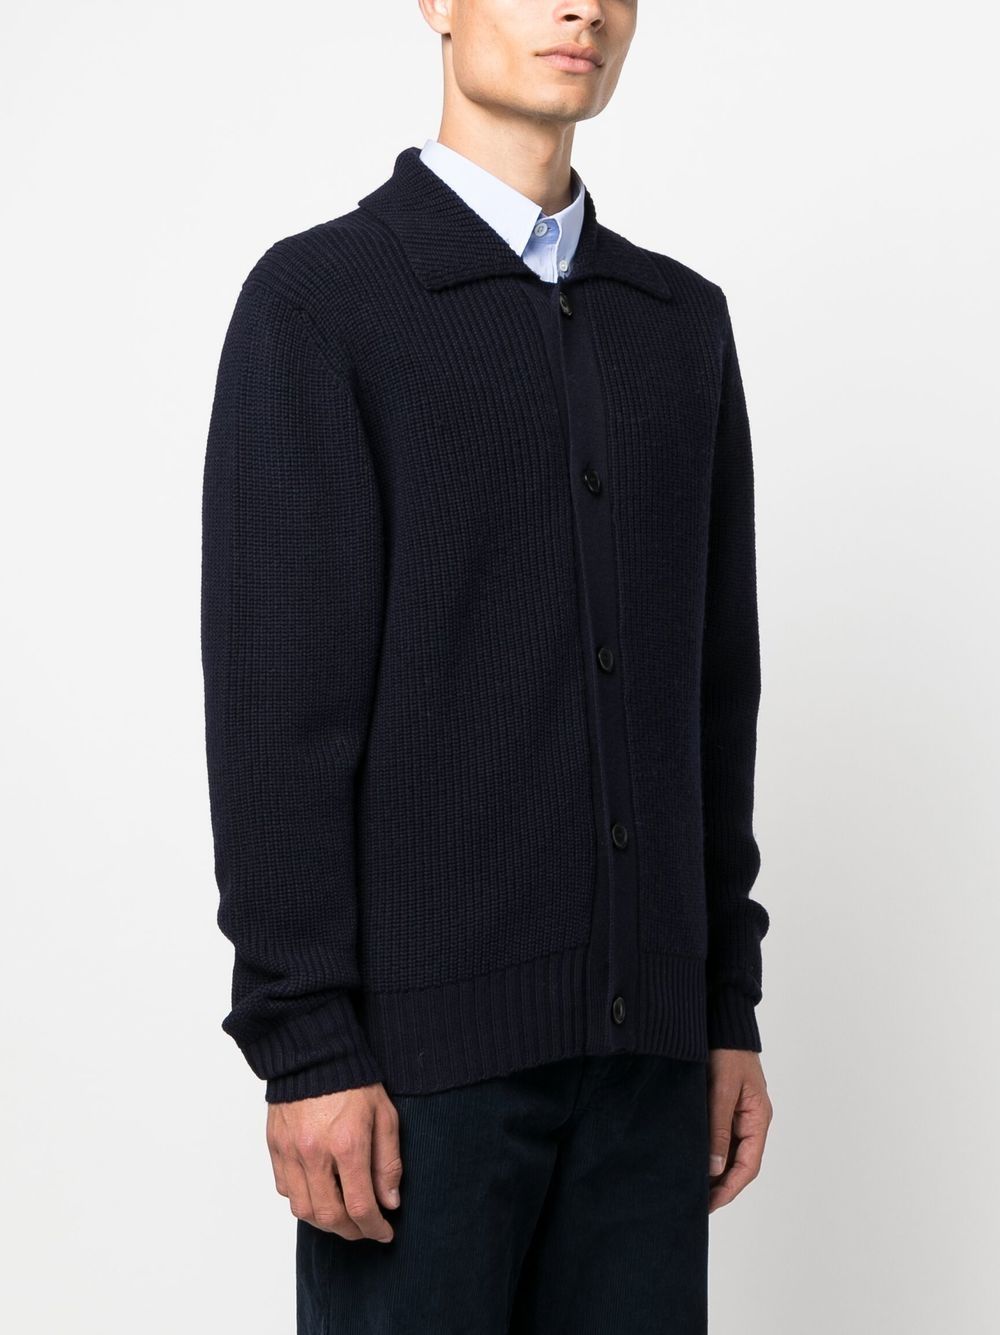 Officine Generale ribbed-knit buttoned-up Cardigan - Farfetch